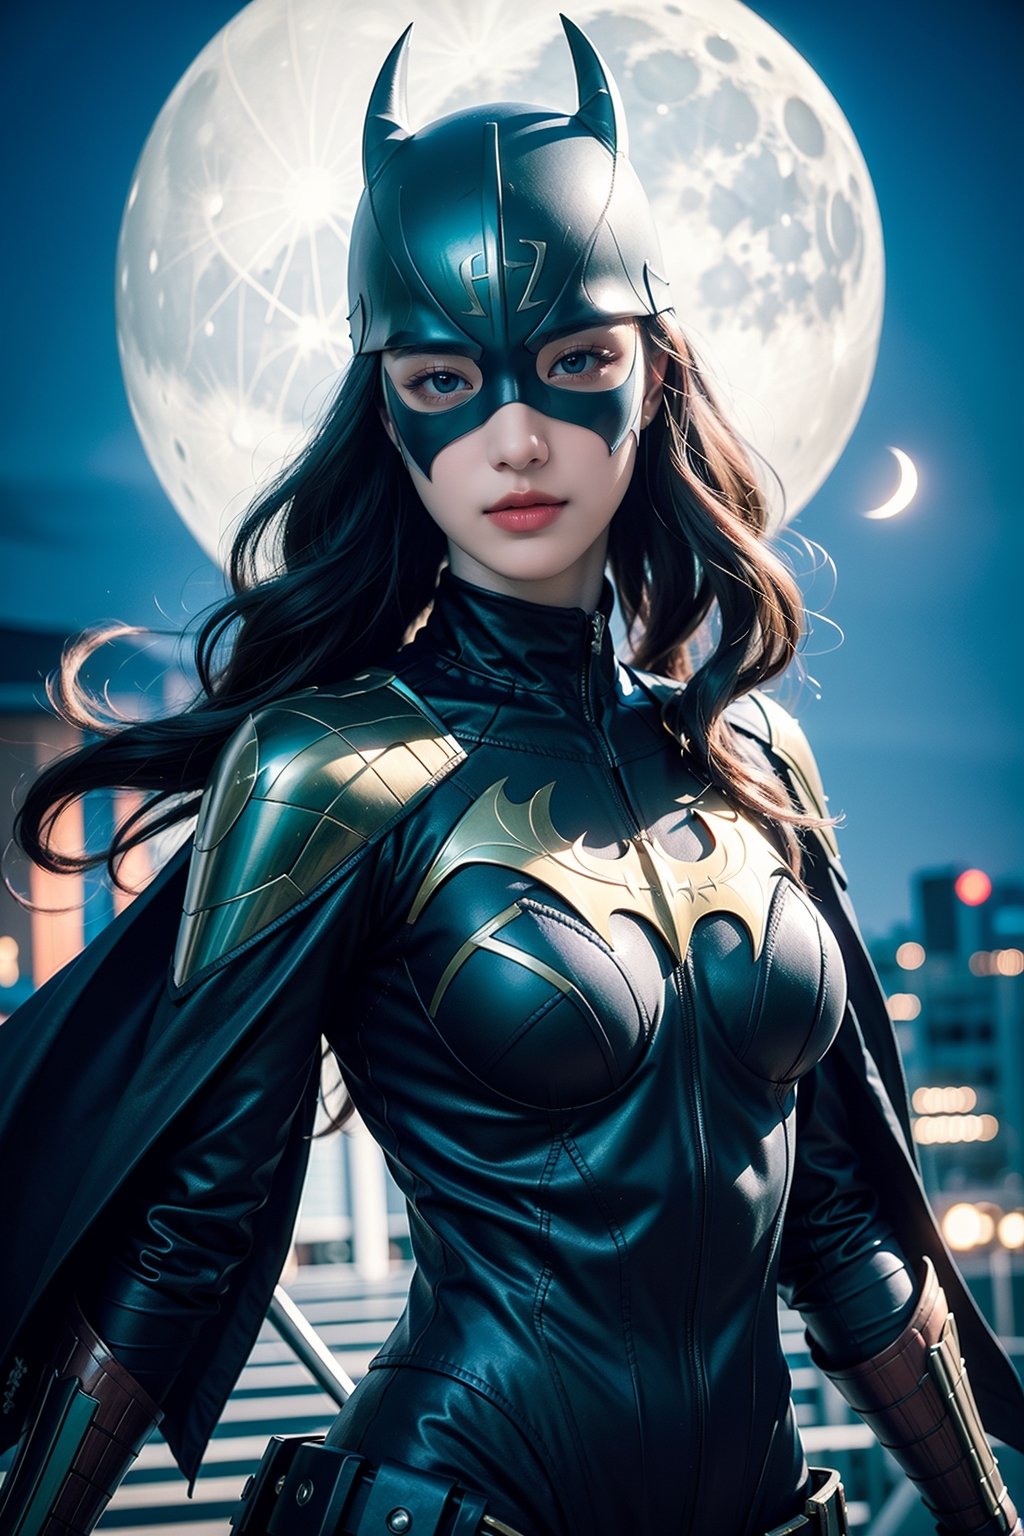 (joker((Batgirl suit)),(green cloak),Run:1.2),(white moon:1.4),(street_on fire:1.1),(fog:0.6),(perfect prompt word,exquisite texture in every detailfinely detailed,highres 32k wallpaper,(HDR:1.4),(Vivid Color:1.4),ultra highres,masterpiece,ultra realistic,The atmosphere is captured in high grain, reminiscent of ISO 800 film with wide angle.real girls, photorealistic,REALISM), joker((Batgirl suit)), dou, full armor, glowing halo, humanoid robot, kabuto (helmet), kusazuri, looking at viewer, solo, split theme, suneate, ((white and black armor),(shoulder armor),(pauldrons),(japanese armor)), ((white eyes),(glowing eyes)), ((white hair),(very long hair),(floating hair)),supersteampunk,LiluCinnamon , dragon fly around castle ,Pirate